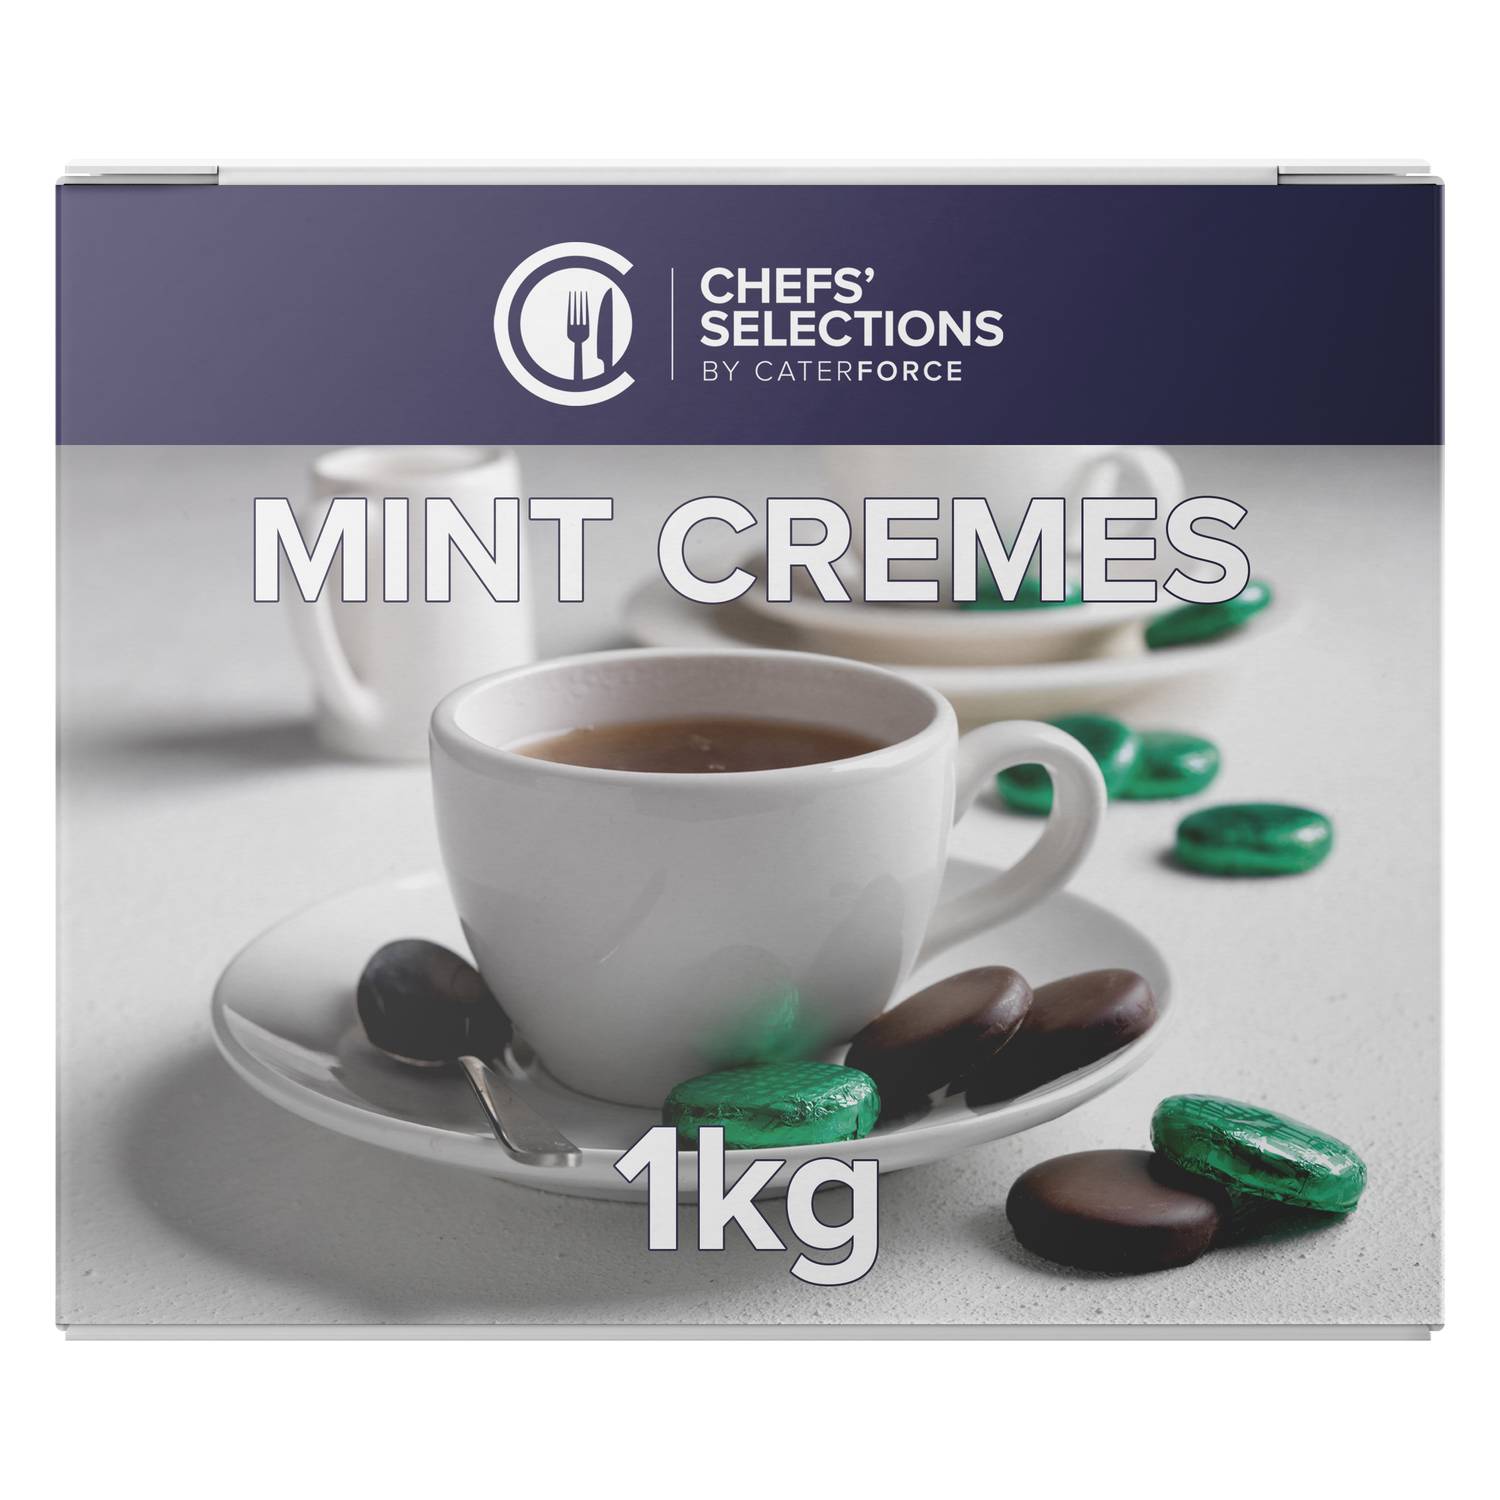 Chefs’ Selections Mint Cremes (6 x 1kg)